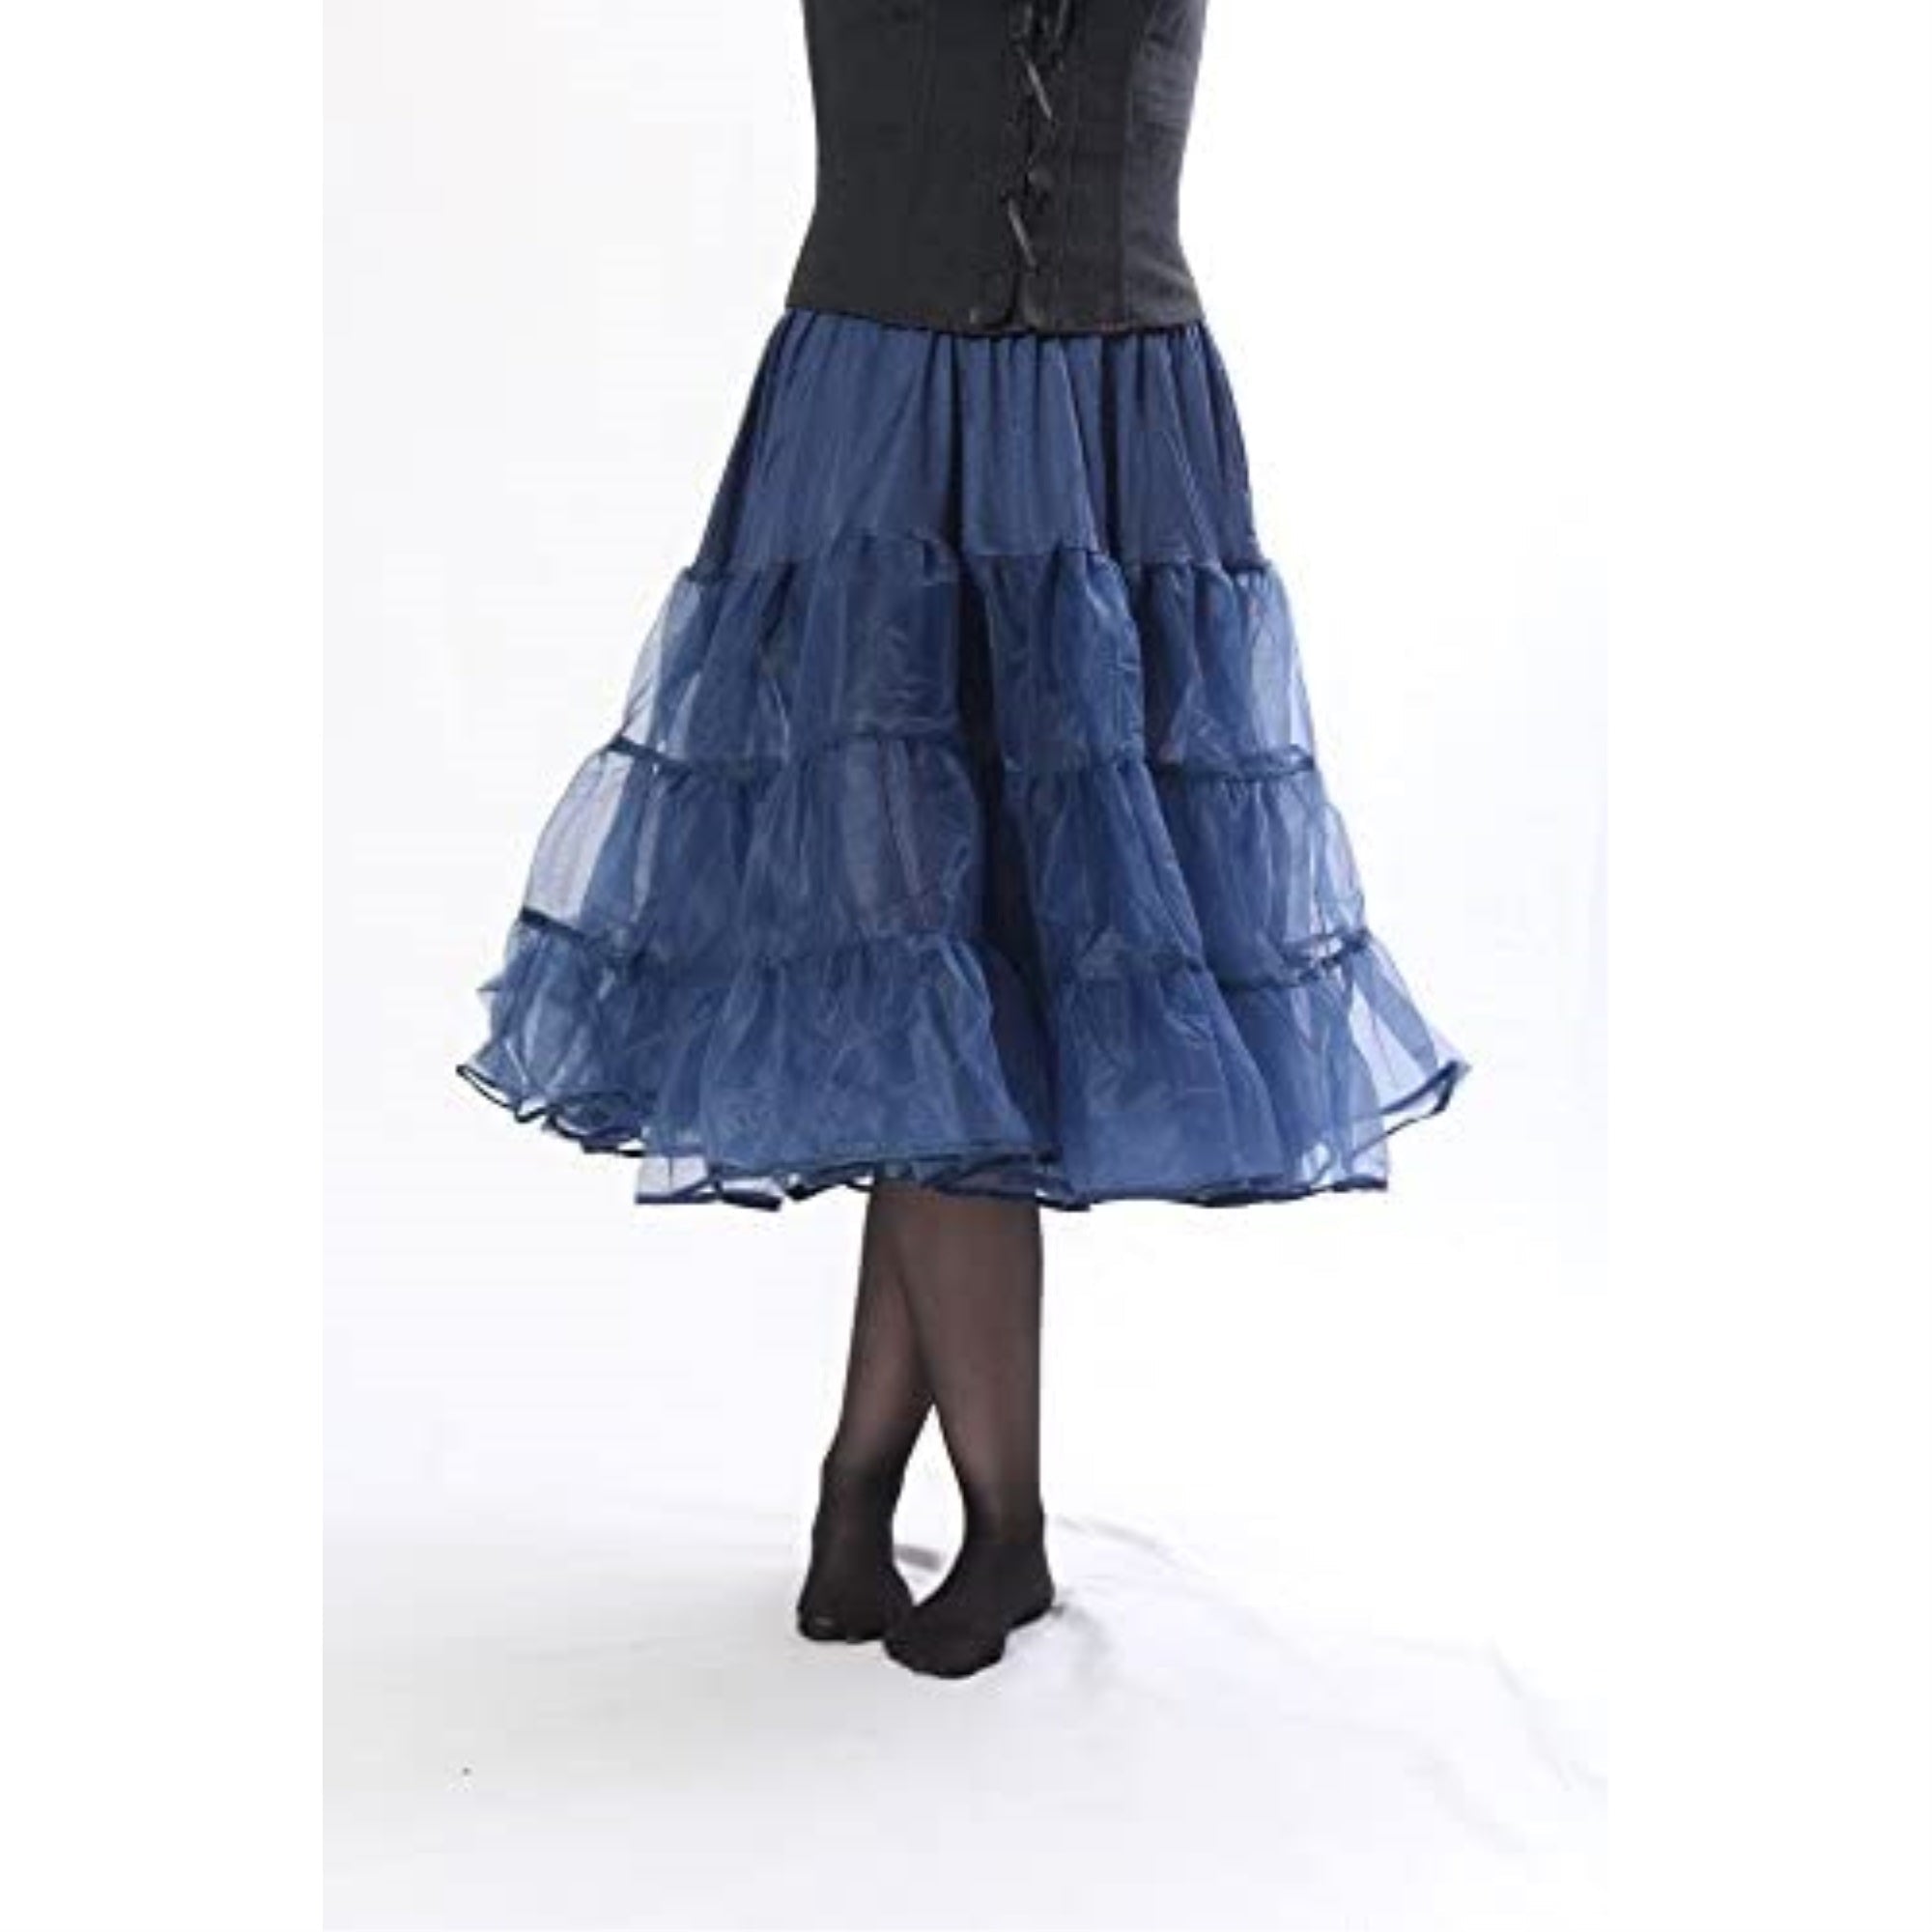 417 Women's Sexy Tea Length Petticoat for Poodle -Navy Blue